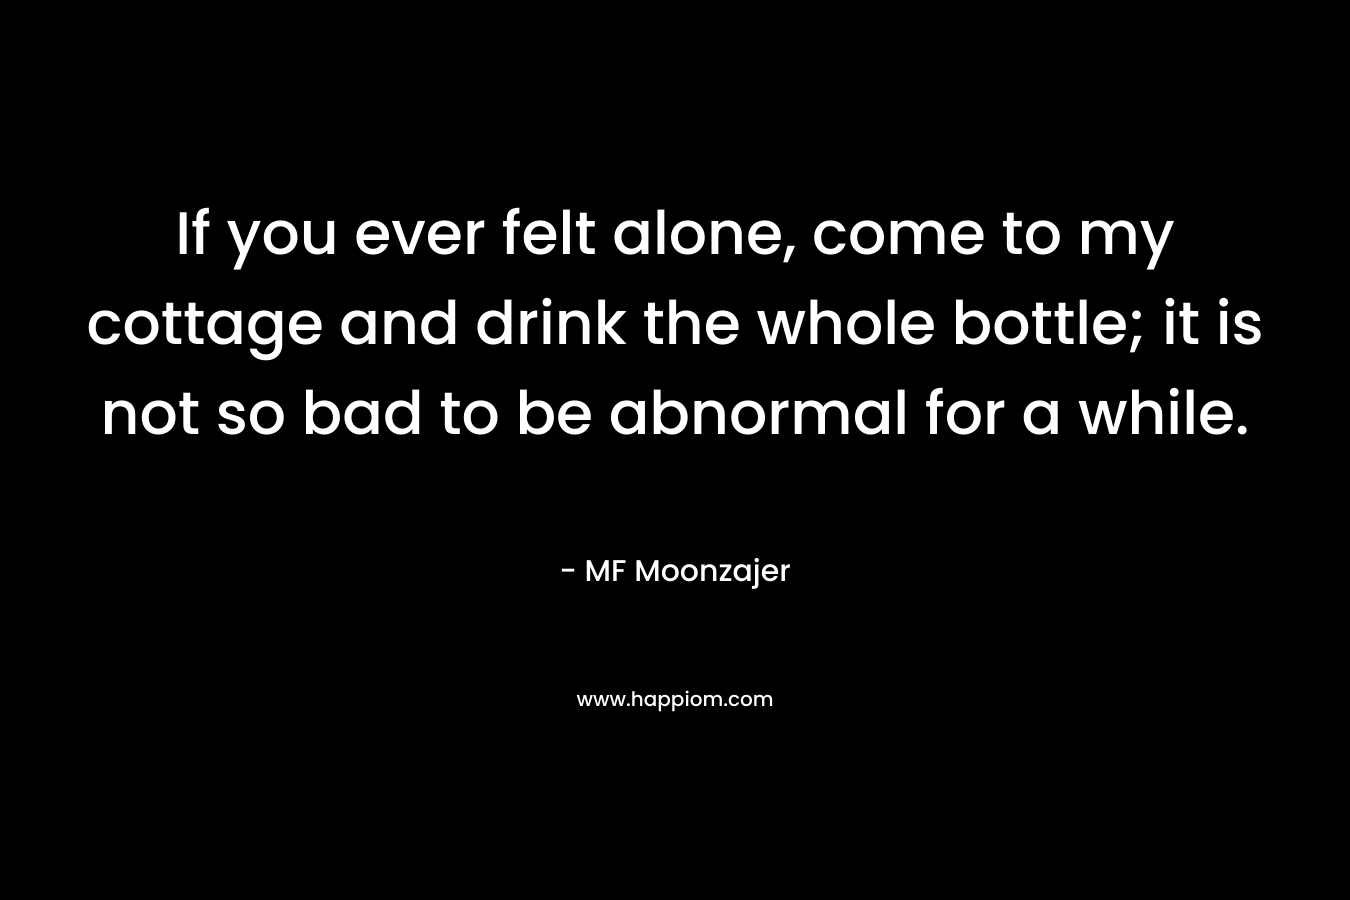 If you ever felt alone, come to my cottage and drink the whole bottle; it is not so bad to be abnormal for a while. – MF Moonzajer